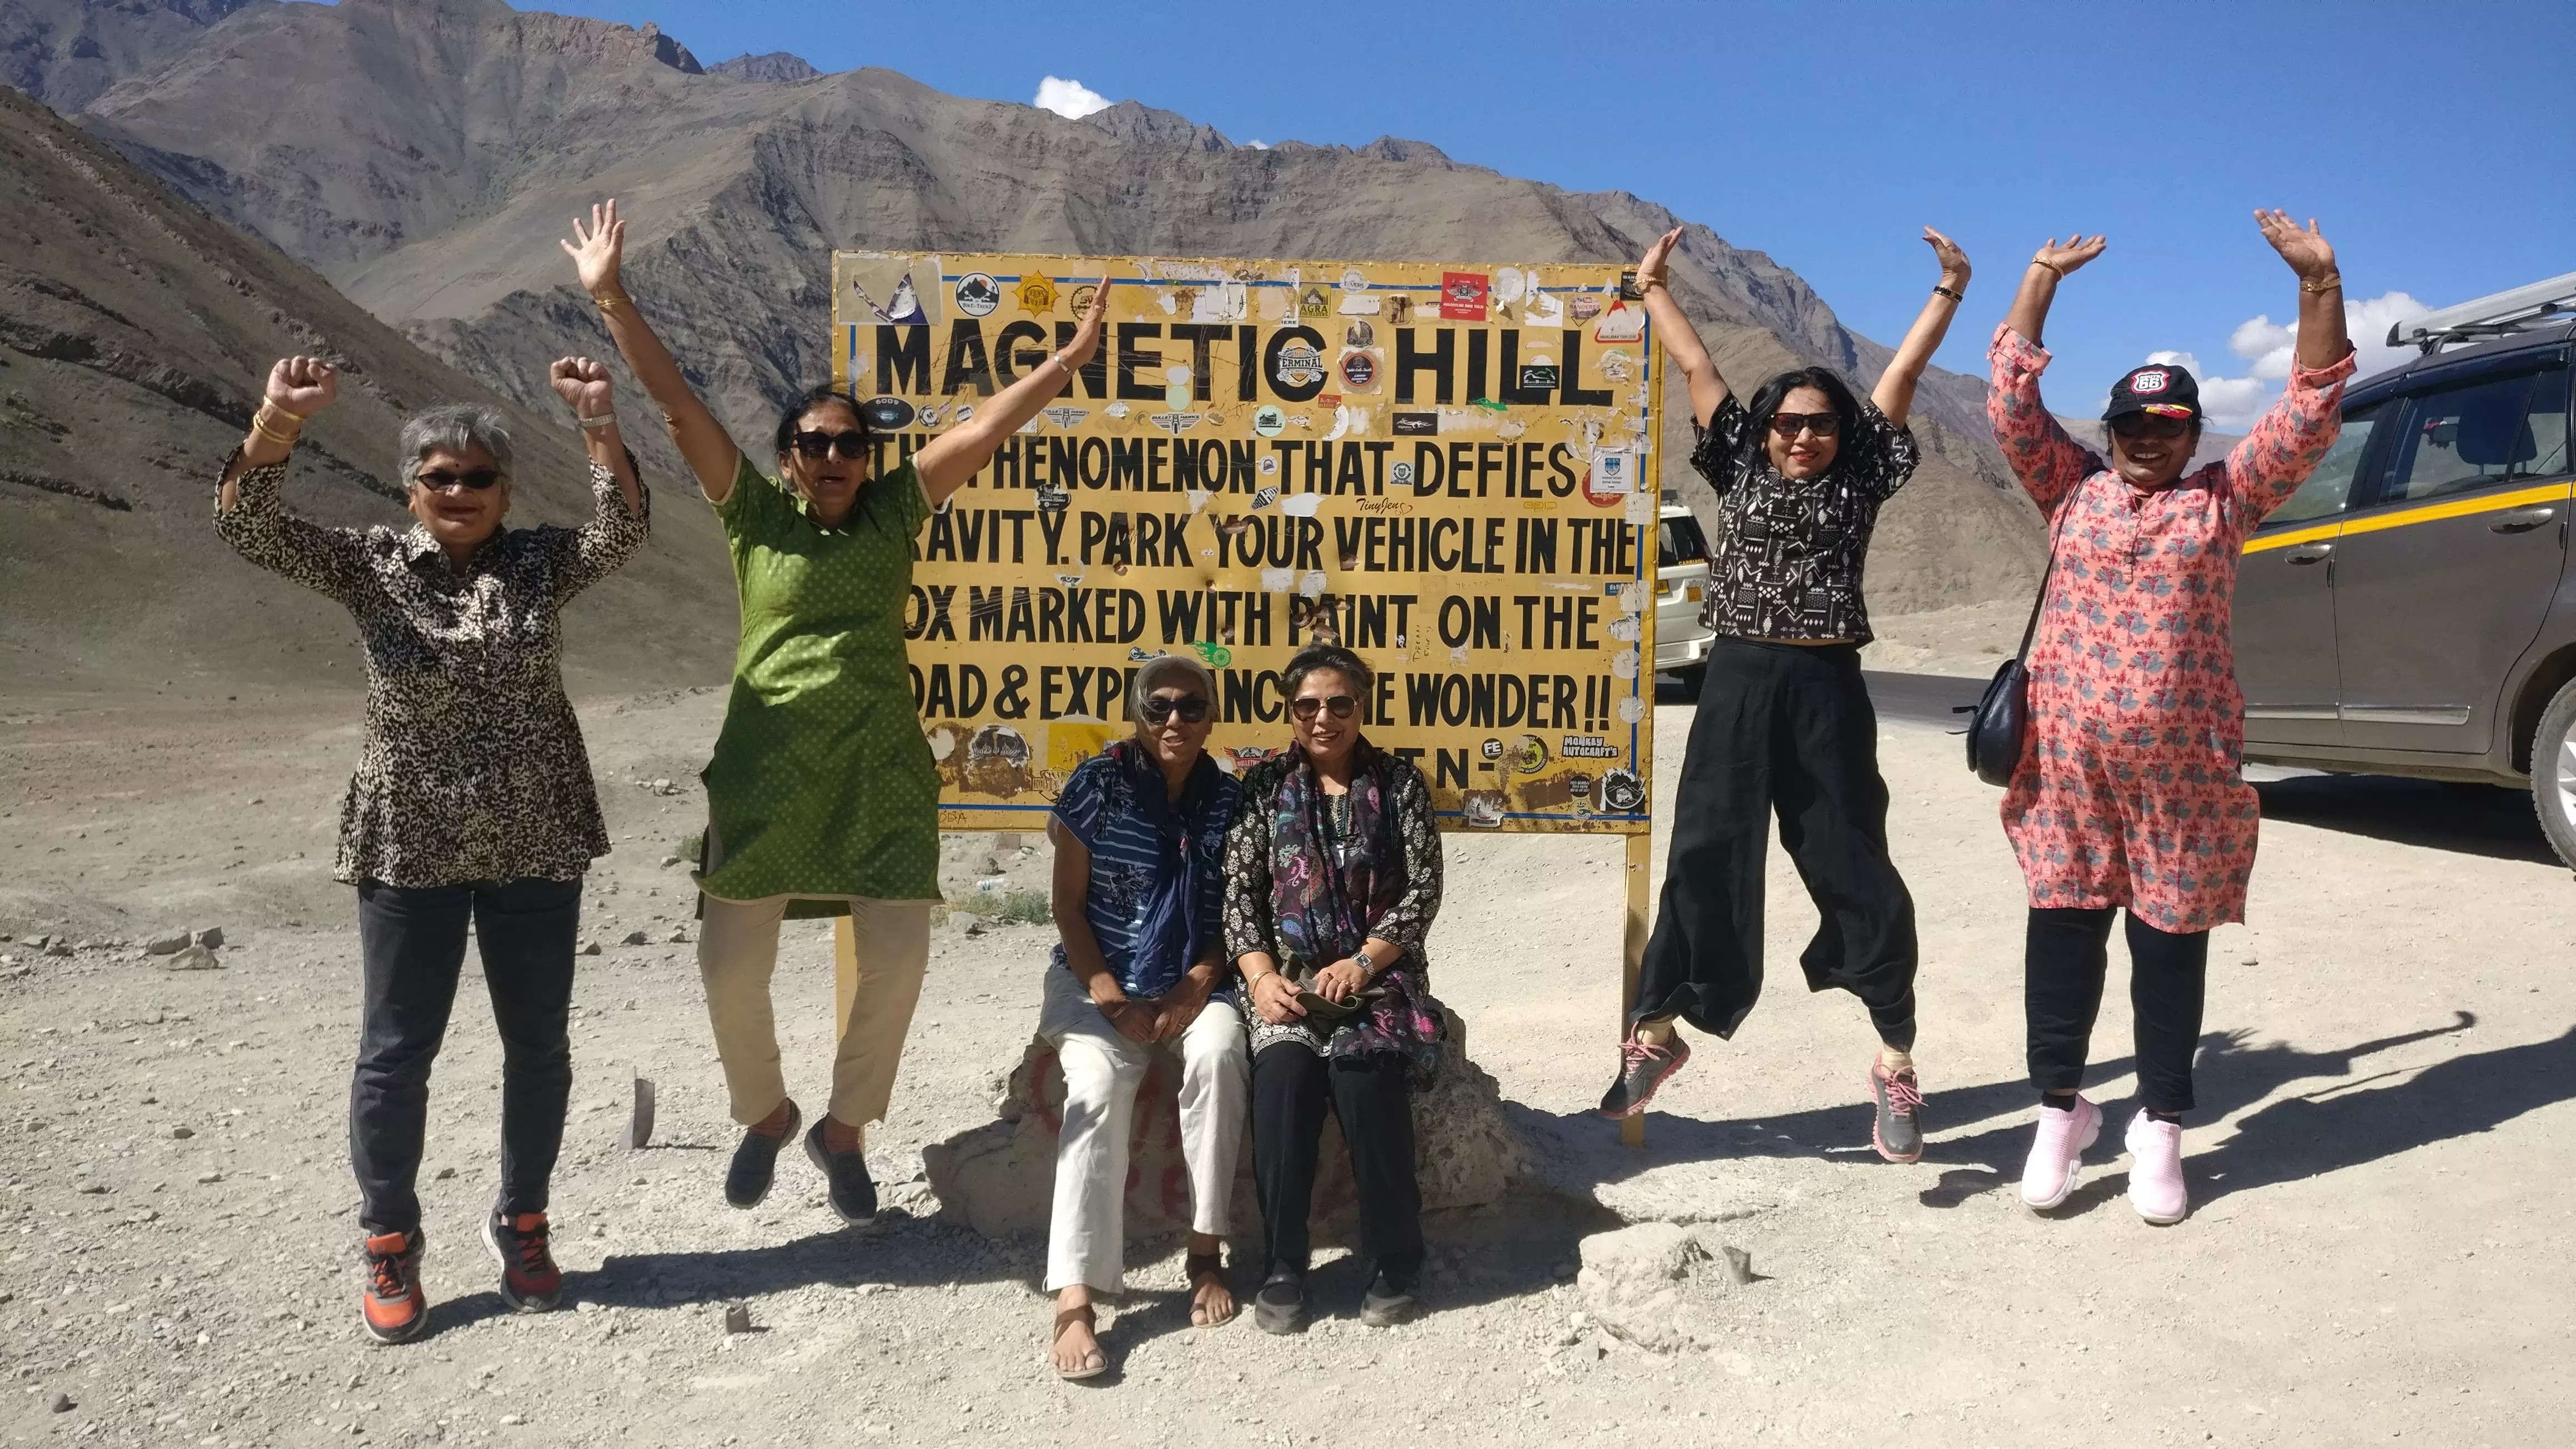 people rejoice on reaching the Magnetic hill in Ladakh